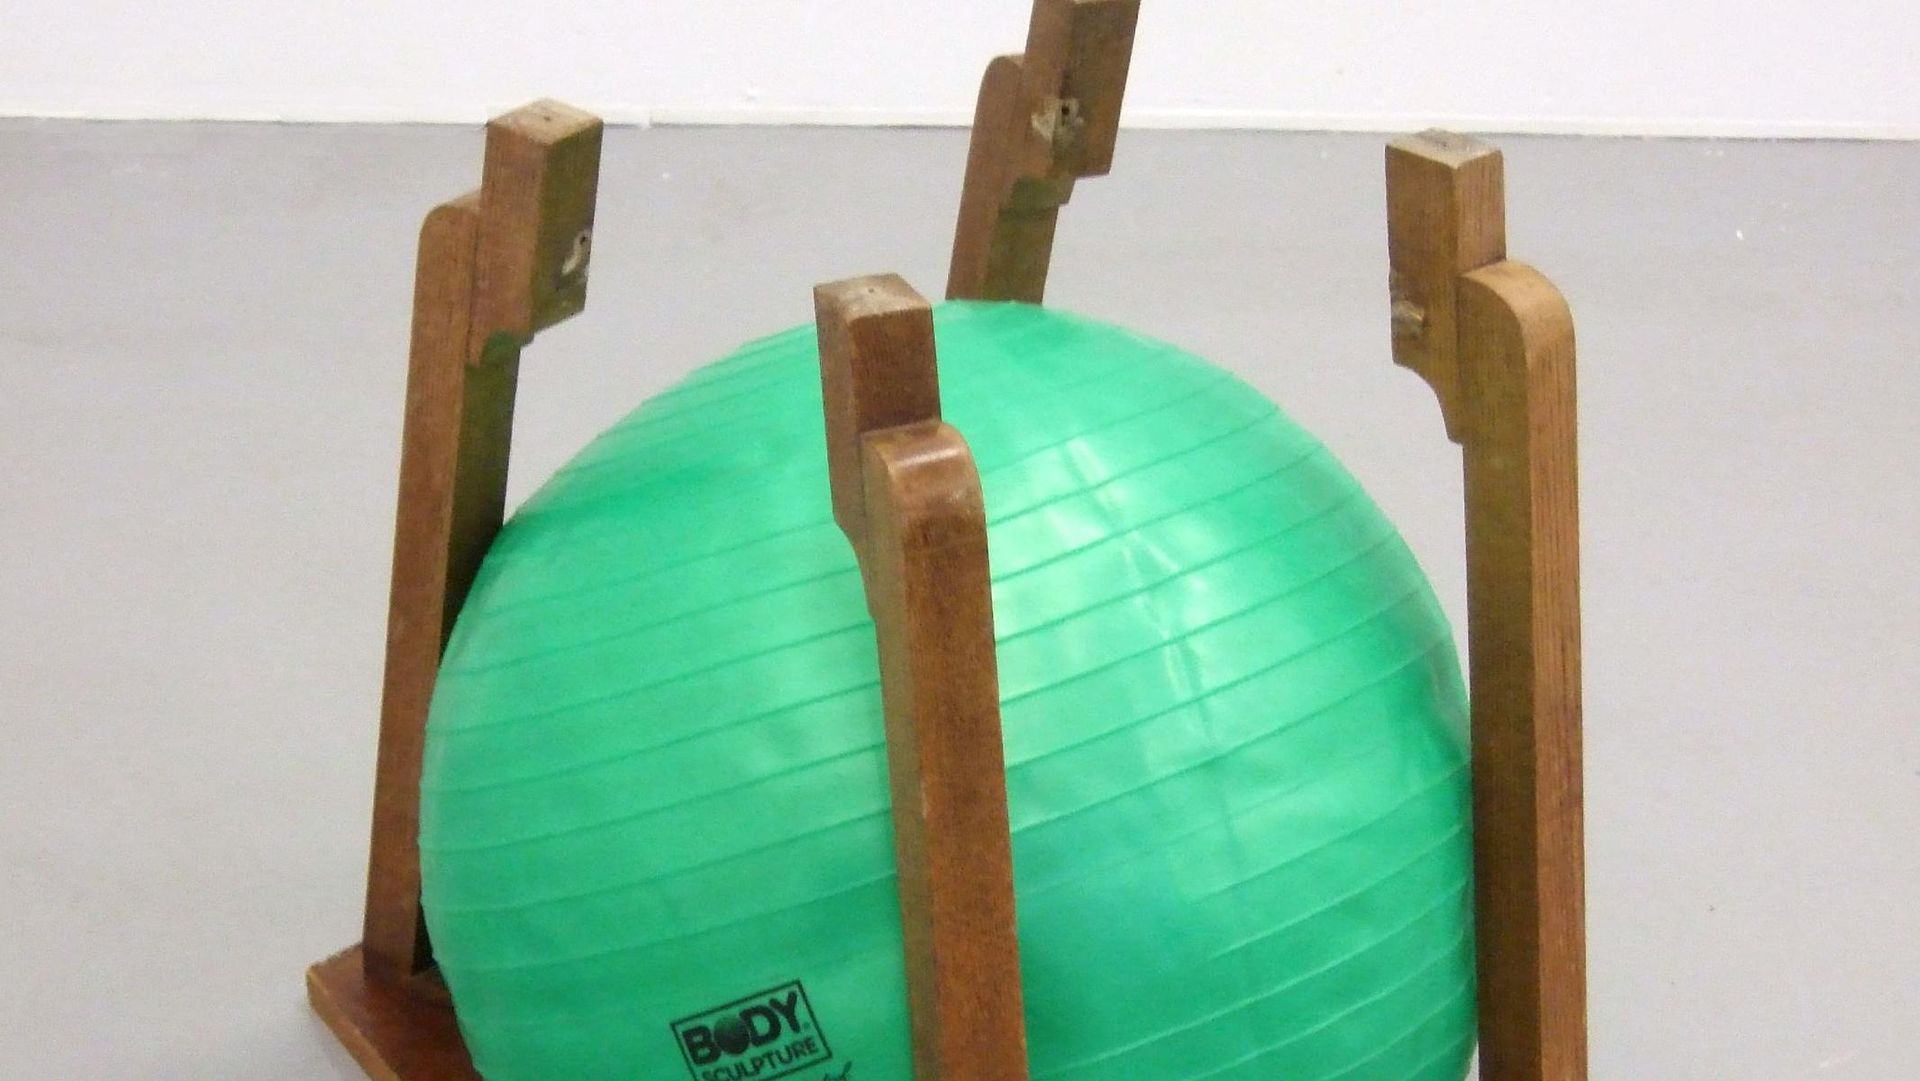 Bettina Buck, In Shape In Control, 2009, wooden table, half inflated rubber ball, 55 x 65 x 50 cm, Courtesy the artist, Rokeby London and Galerie Opdahl, Berlin